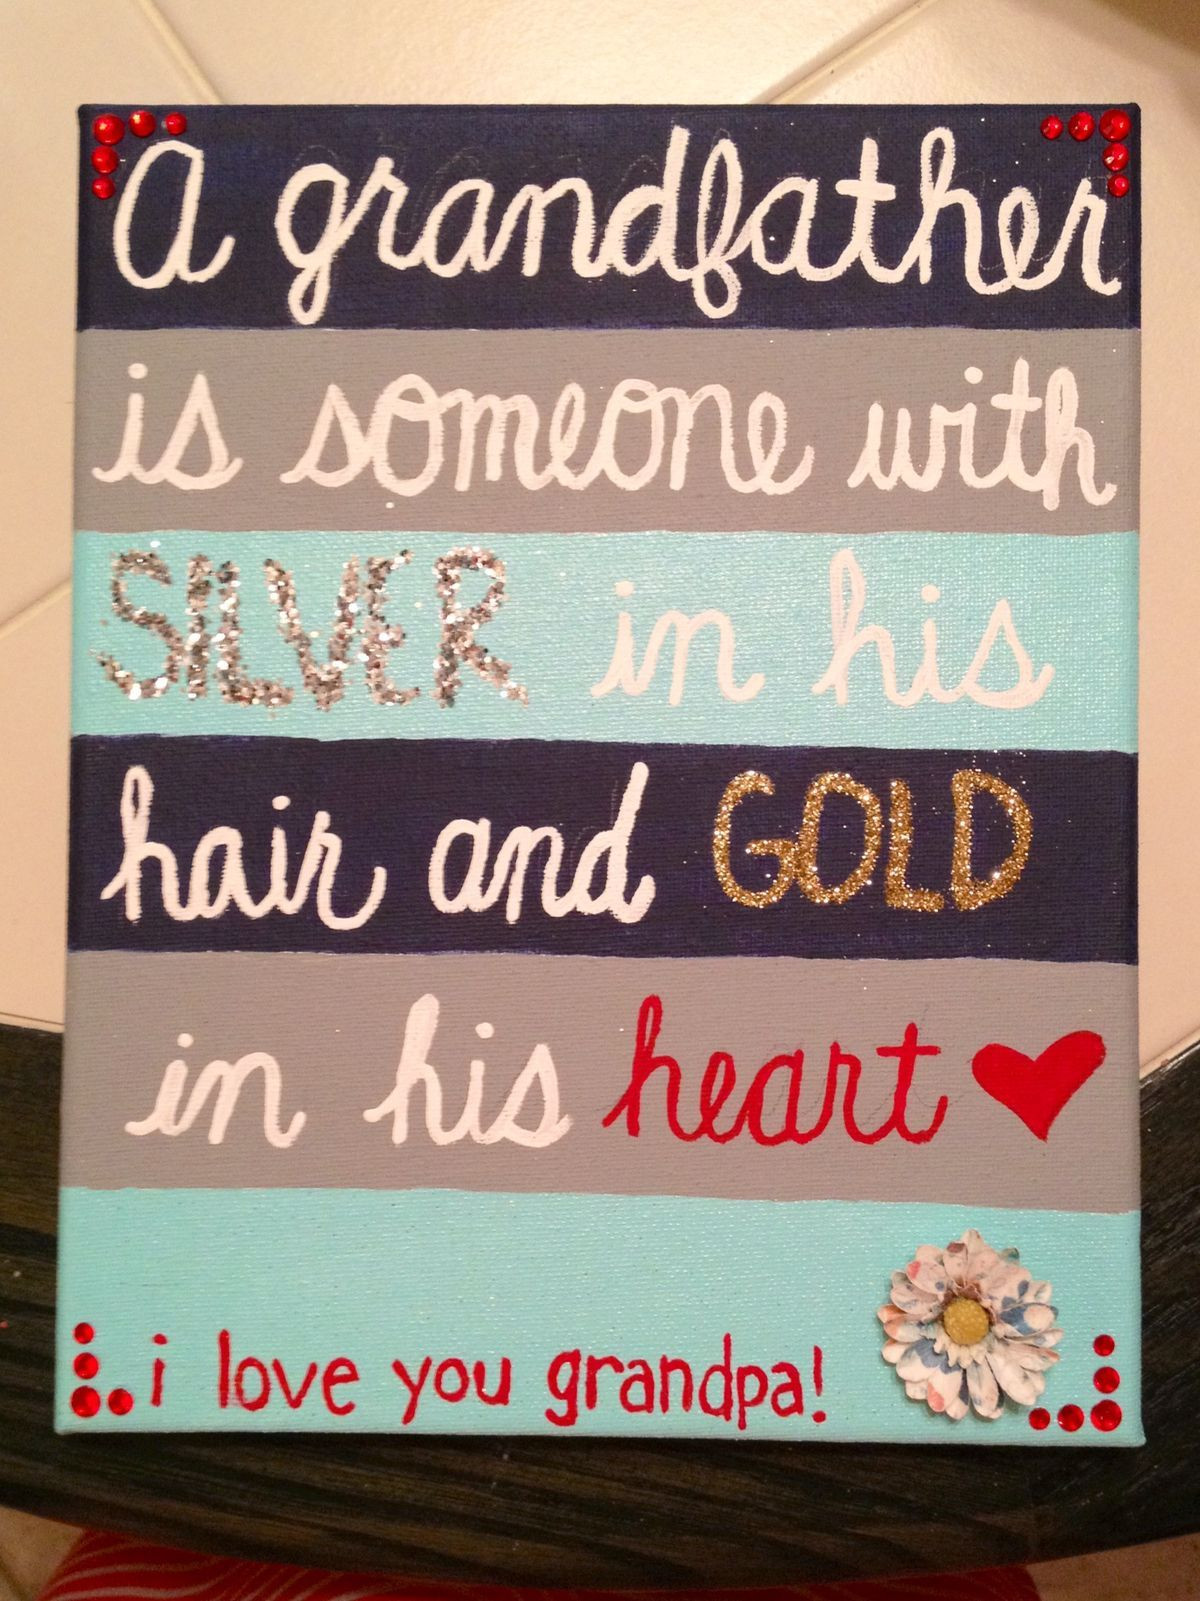 Grandfather Birthday Gift Ideas
 Pin by Amber Bennett on Gifts